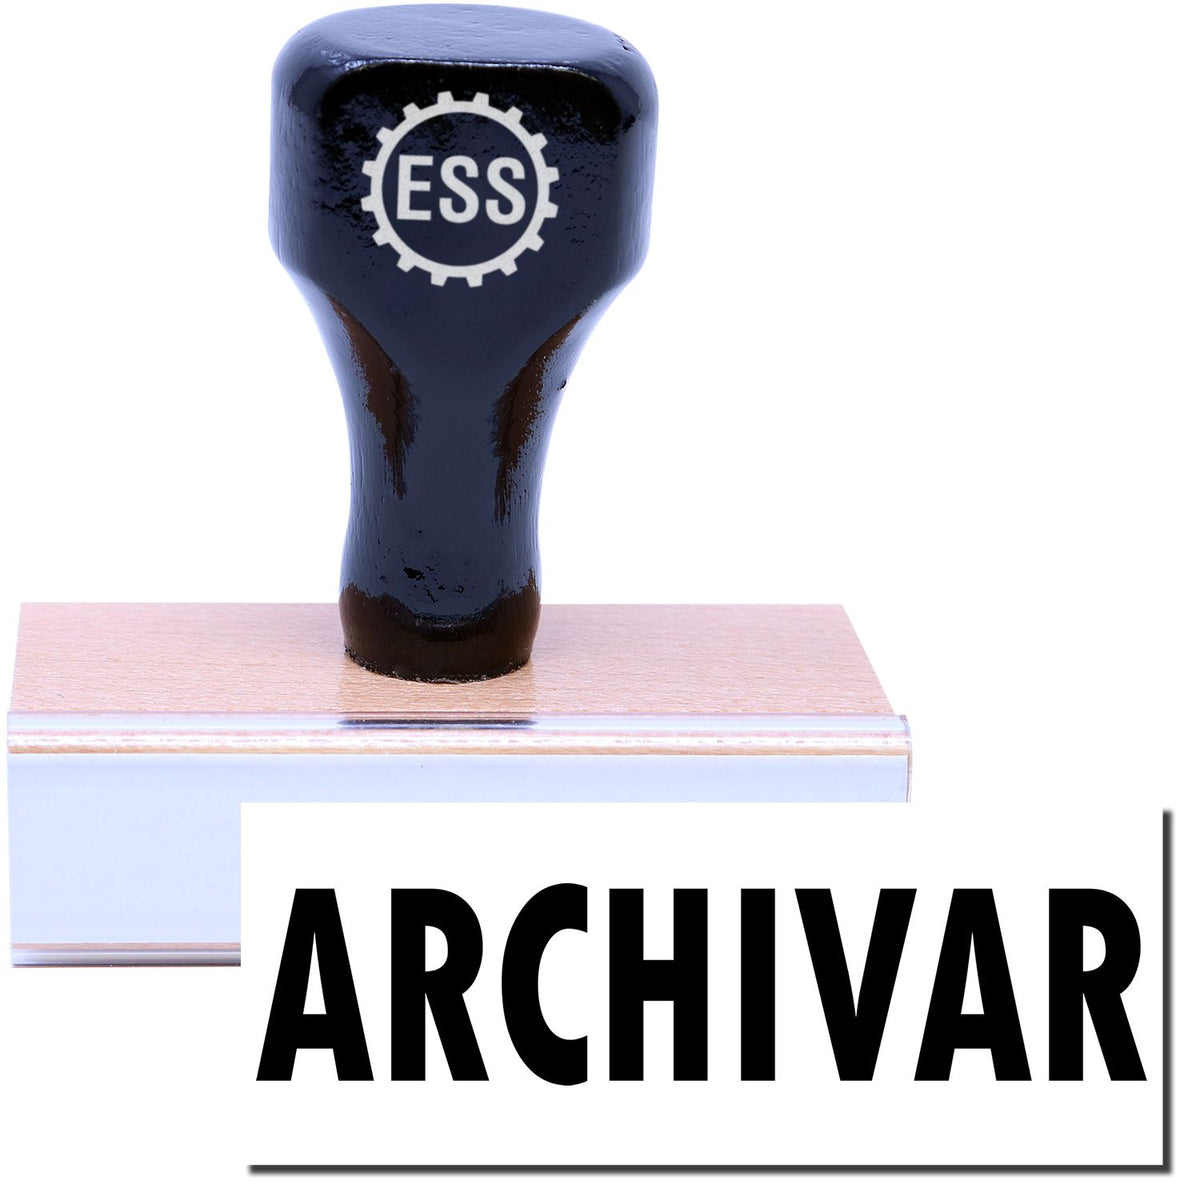 A stock office rubber stamp with a stamped image showing how the text &quot;ARCHIVAR&quot; in a large font is displayed after stamping.